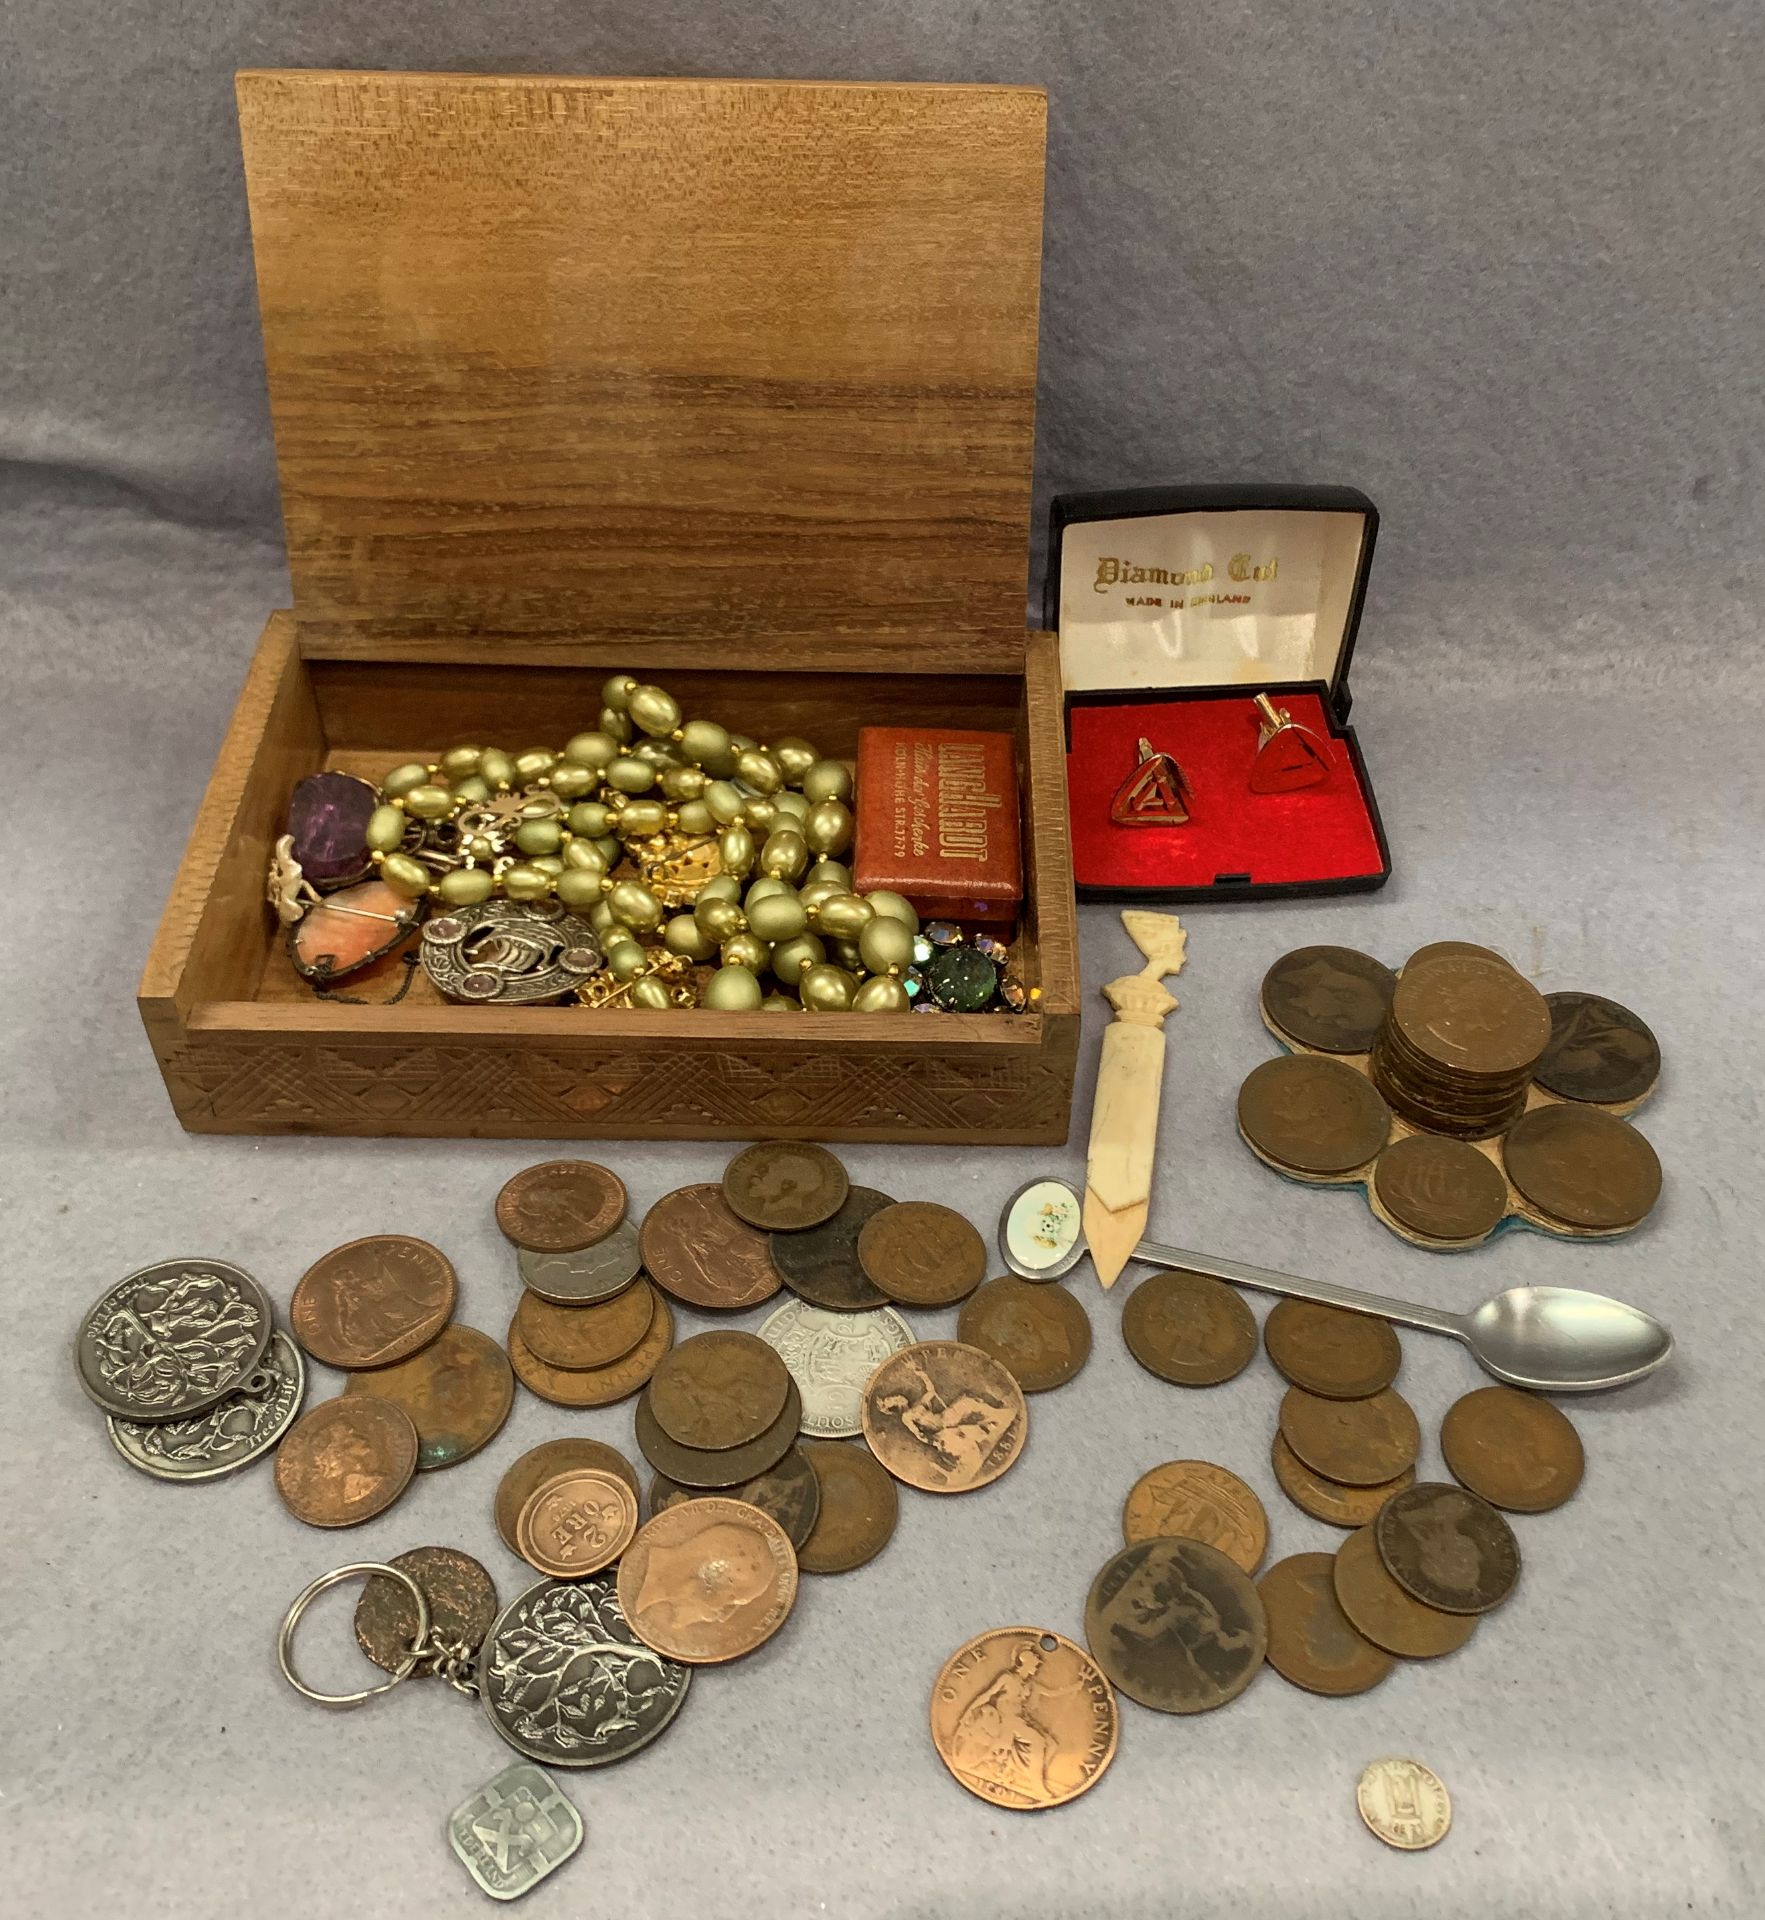 Contents to lid a small quantity of costume jewellery and coins